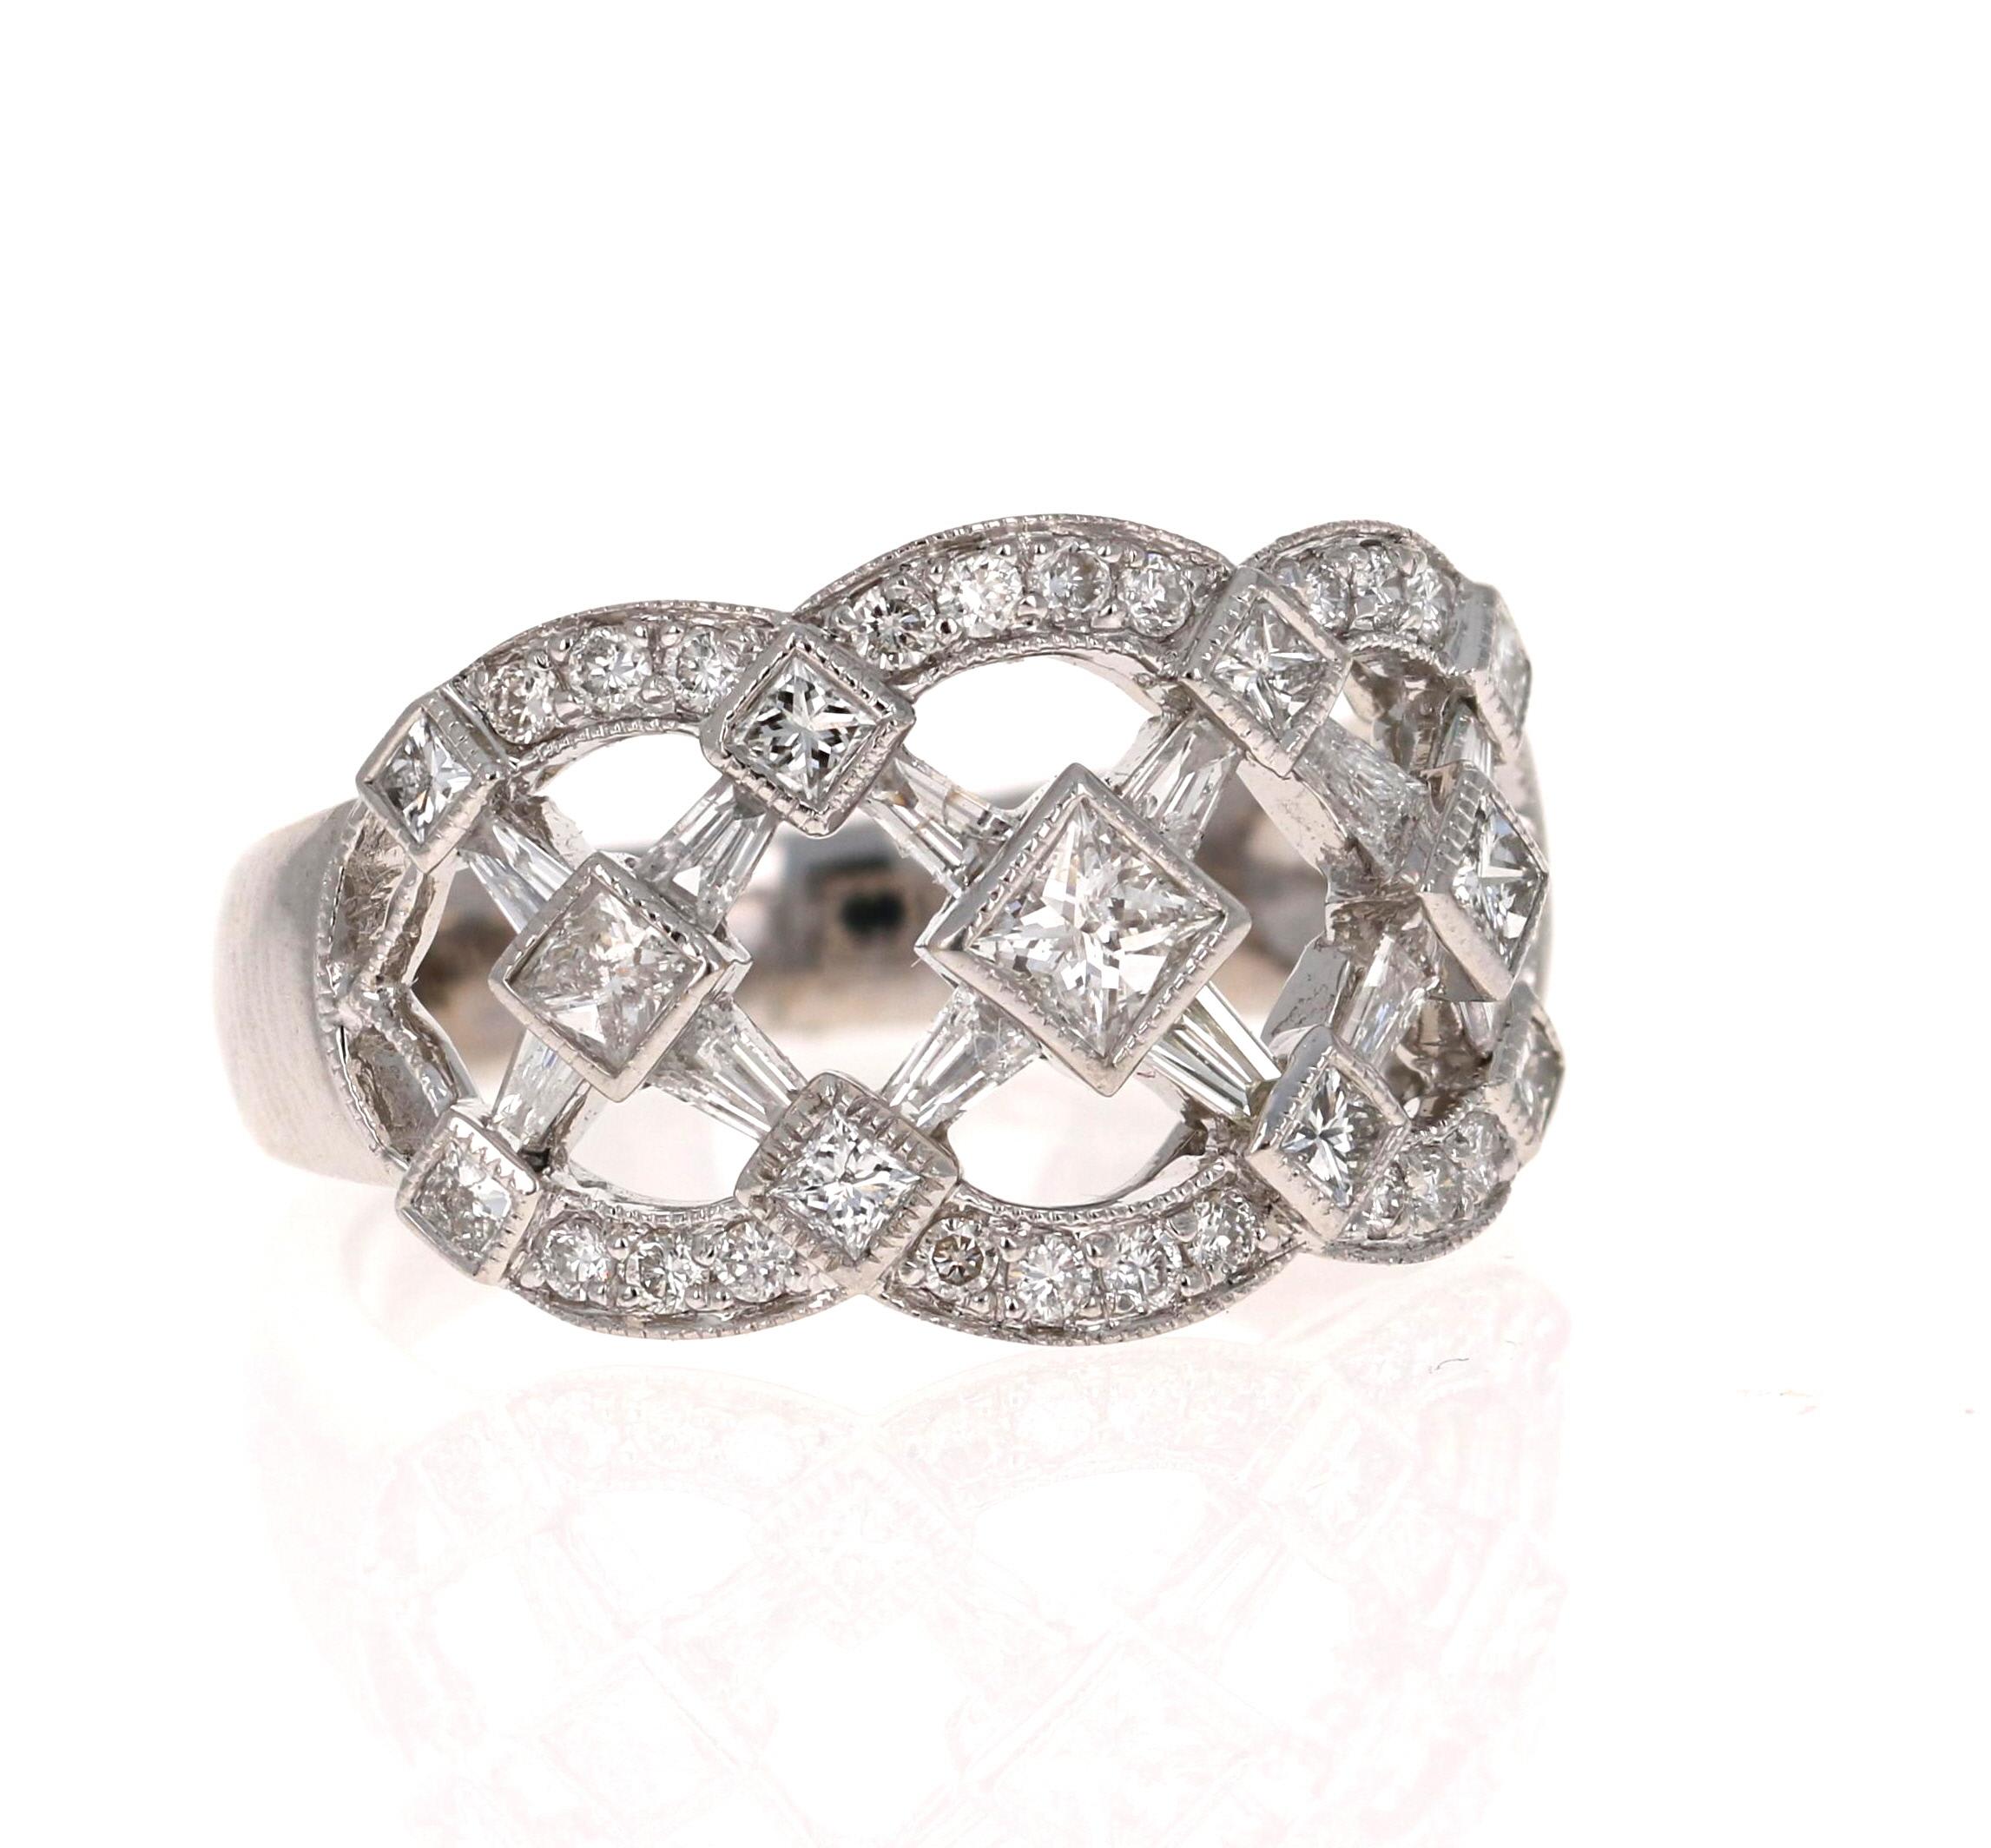  Stylish Cocktail Ring with 1.50 Carats in Diamonds!

There are a cluster of Round and Princess Cut Diamonds that weigh 1.50 Carats. The Clarity and Color of the diamonds is SI-F.

Beautifully set in 14 Karat White Gold and weighs approximately 7.2